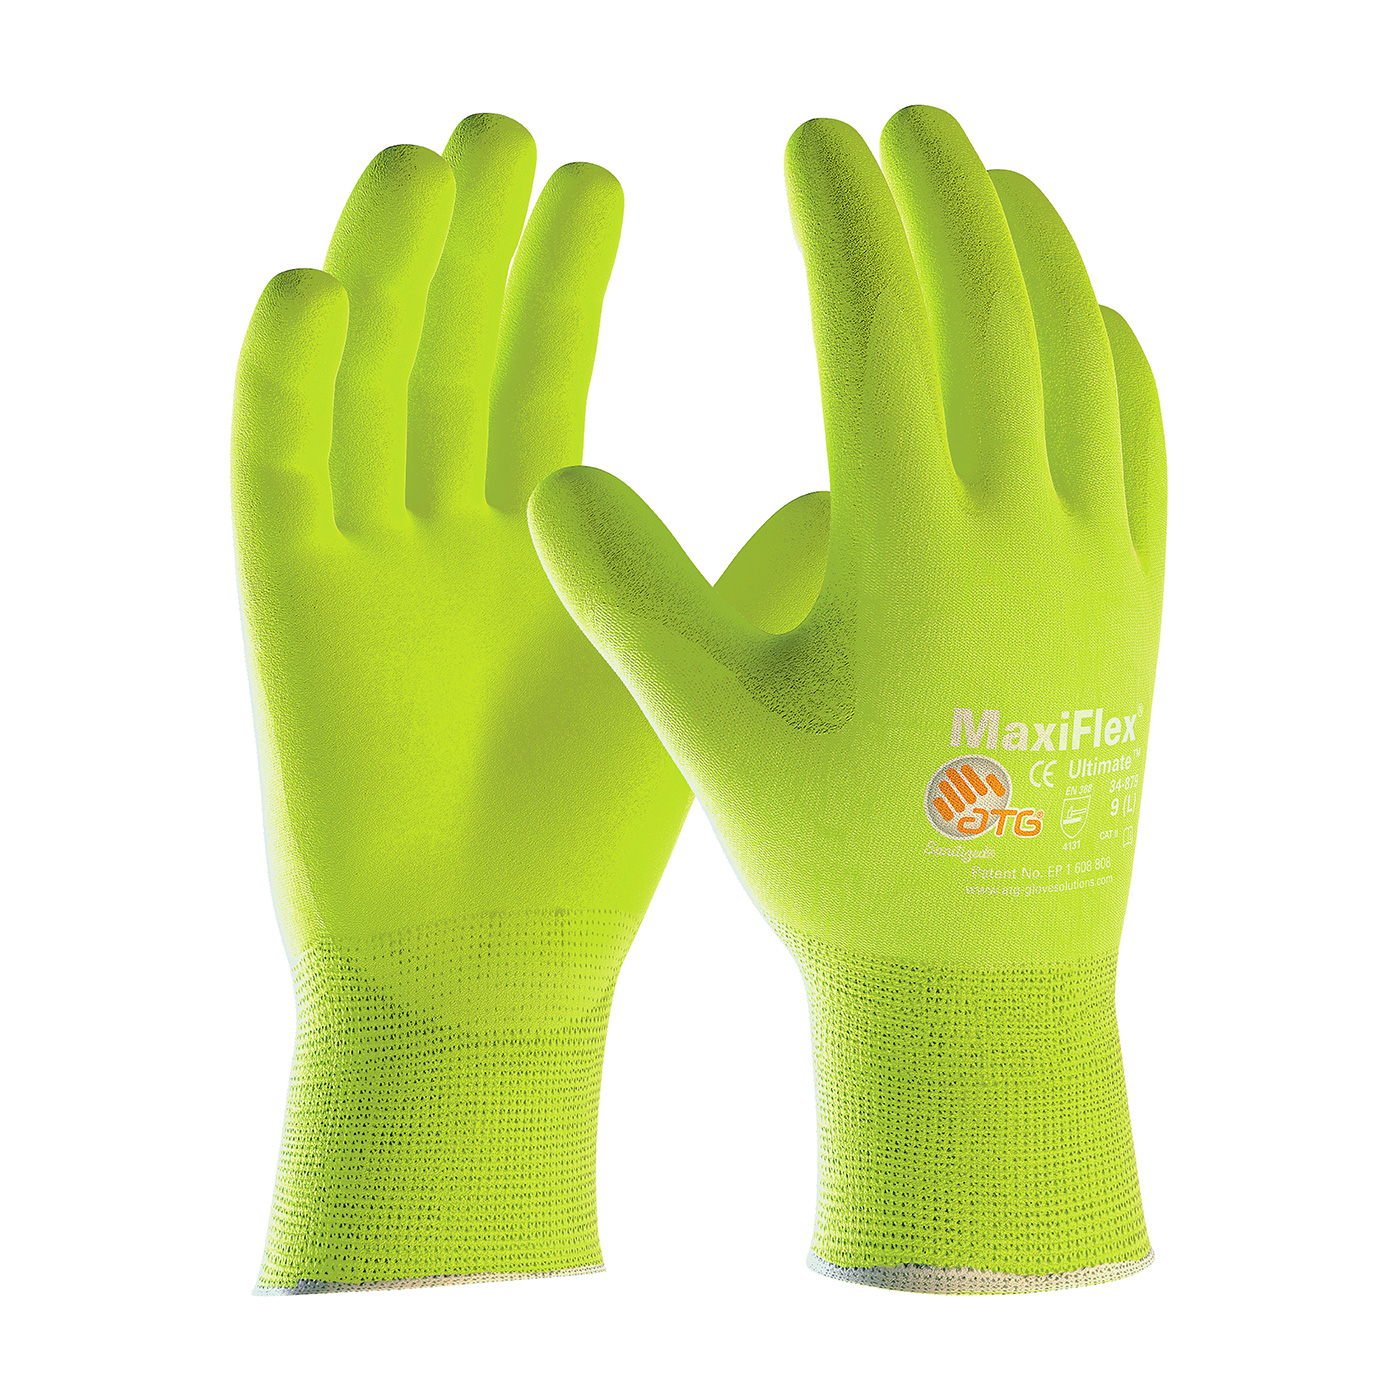 PIP 34-874FY/S MaxiFlex Ultimate Hi-Vis Seamless Knit Nylon/Lycra Glove with Nitrile Coated MicroFoam Grip on Palm & Fingers - Small PID-34 874FY S